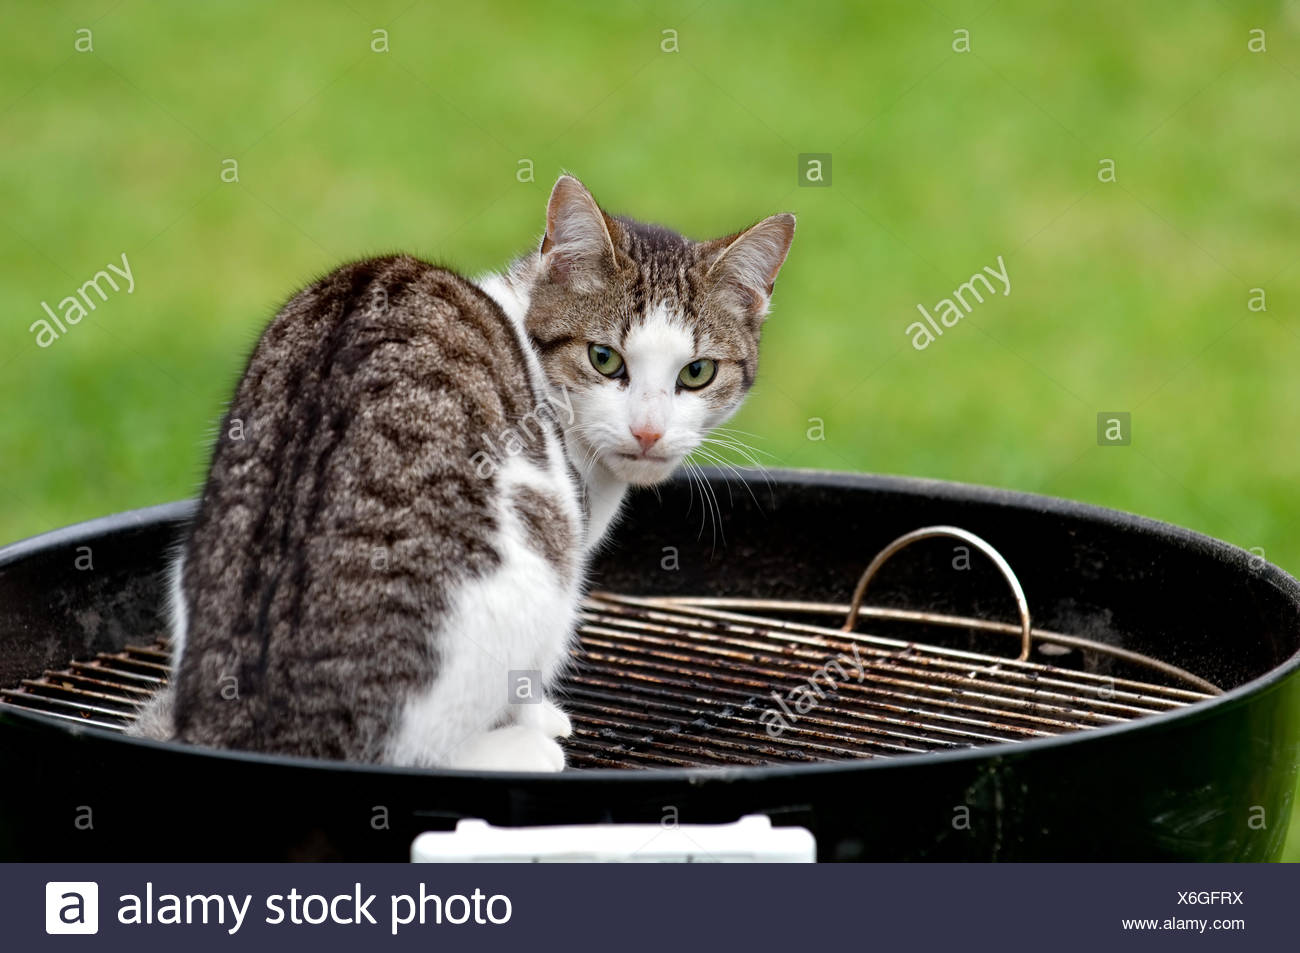 Cat on grill Stock Photo: 279417486 - Alamy